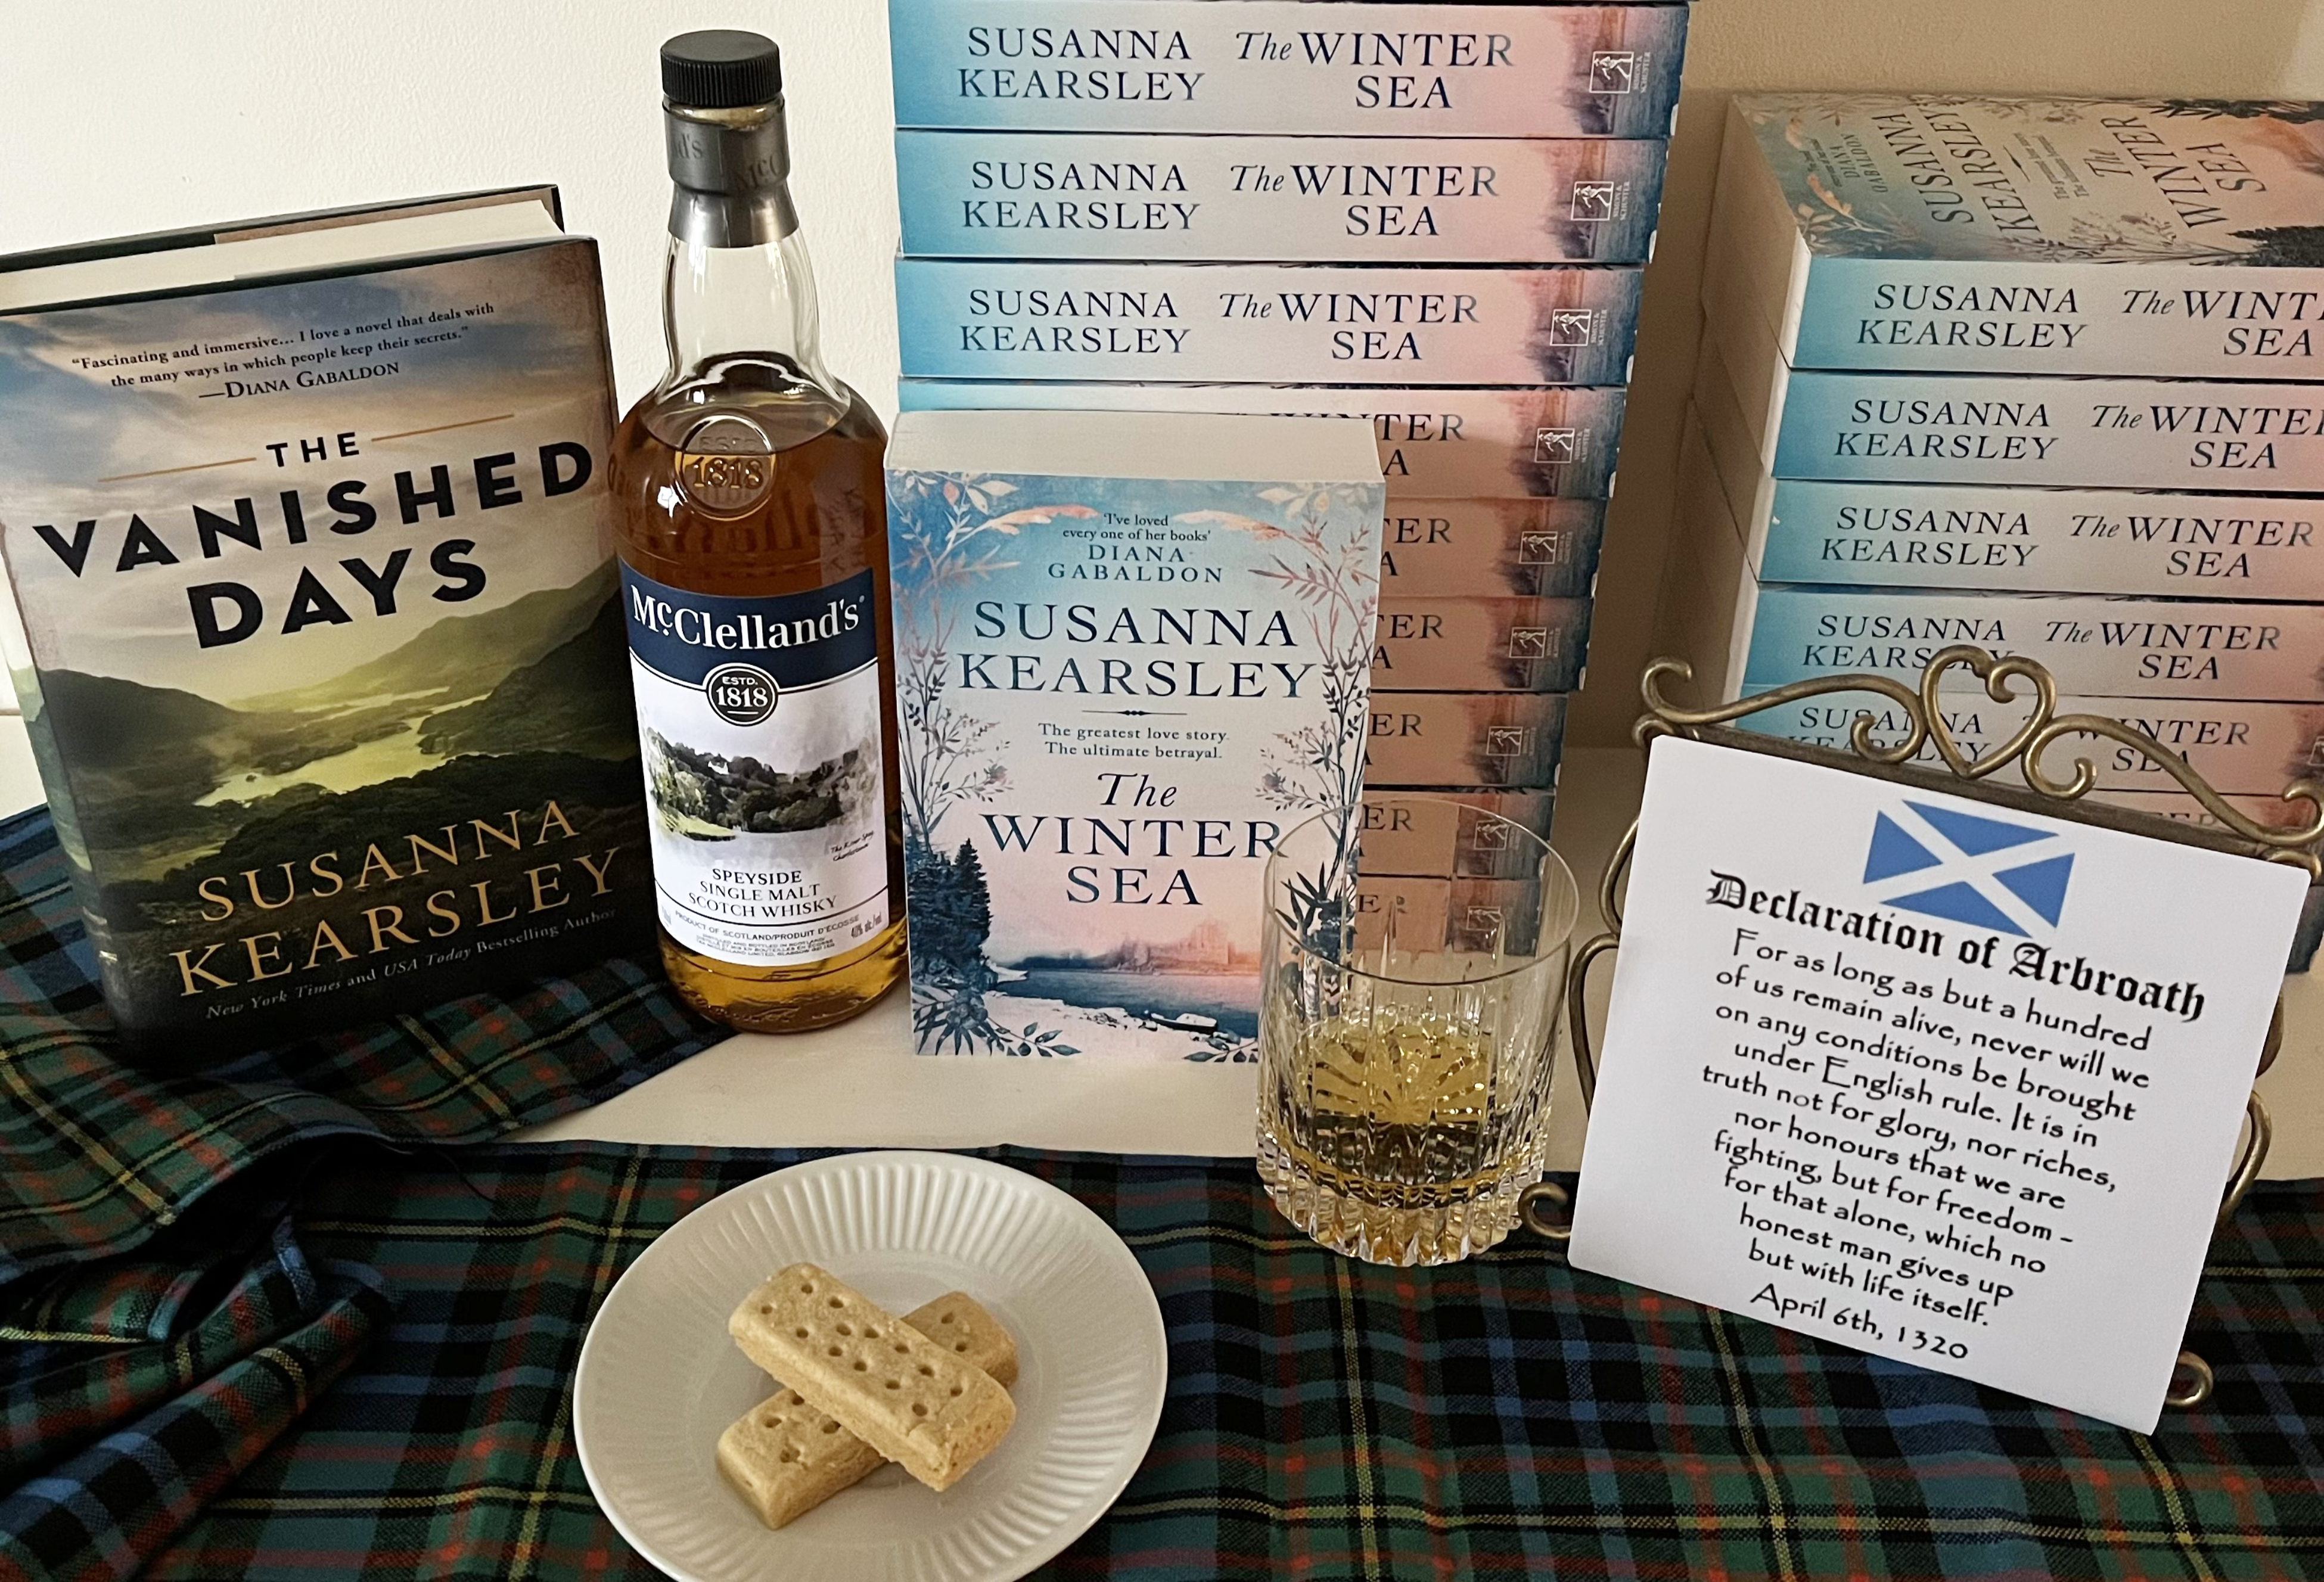 Susanna's books The Vanished Days and The Winter Sea in a still-life arrangement with a bottle and glass of whisky, shortbread biscuits crossed in a Saltire, and a copy of part of the Declaration of Arbroath, all on top of a tartan wool scarf.